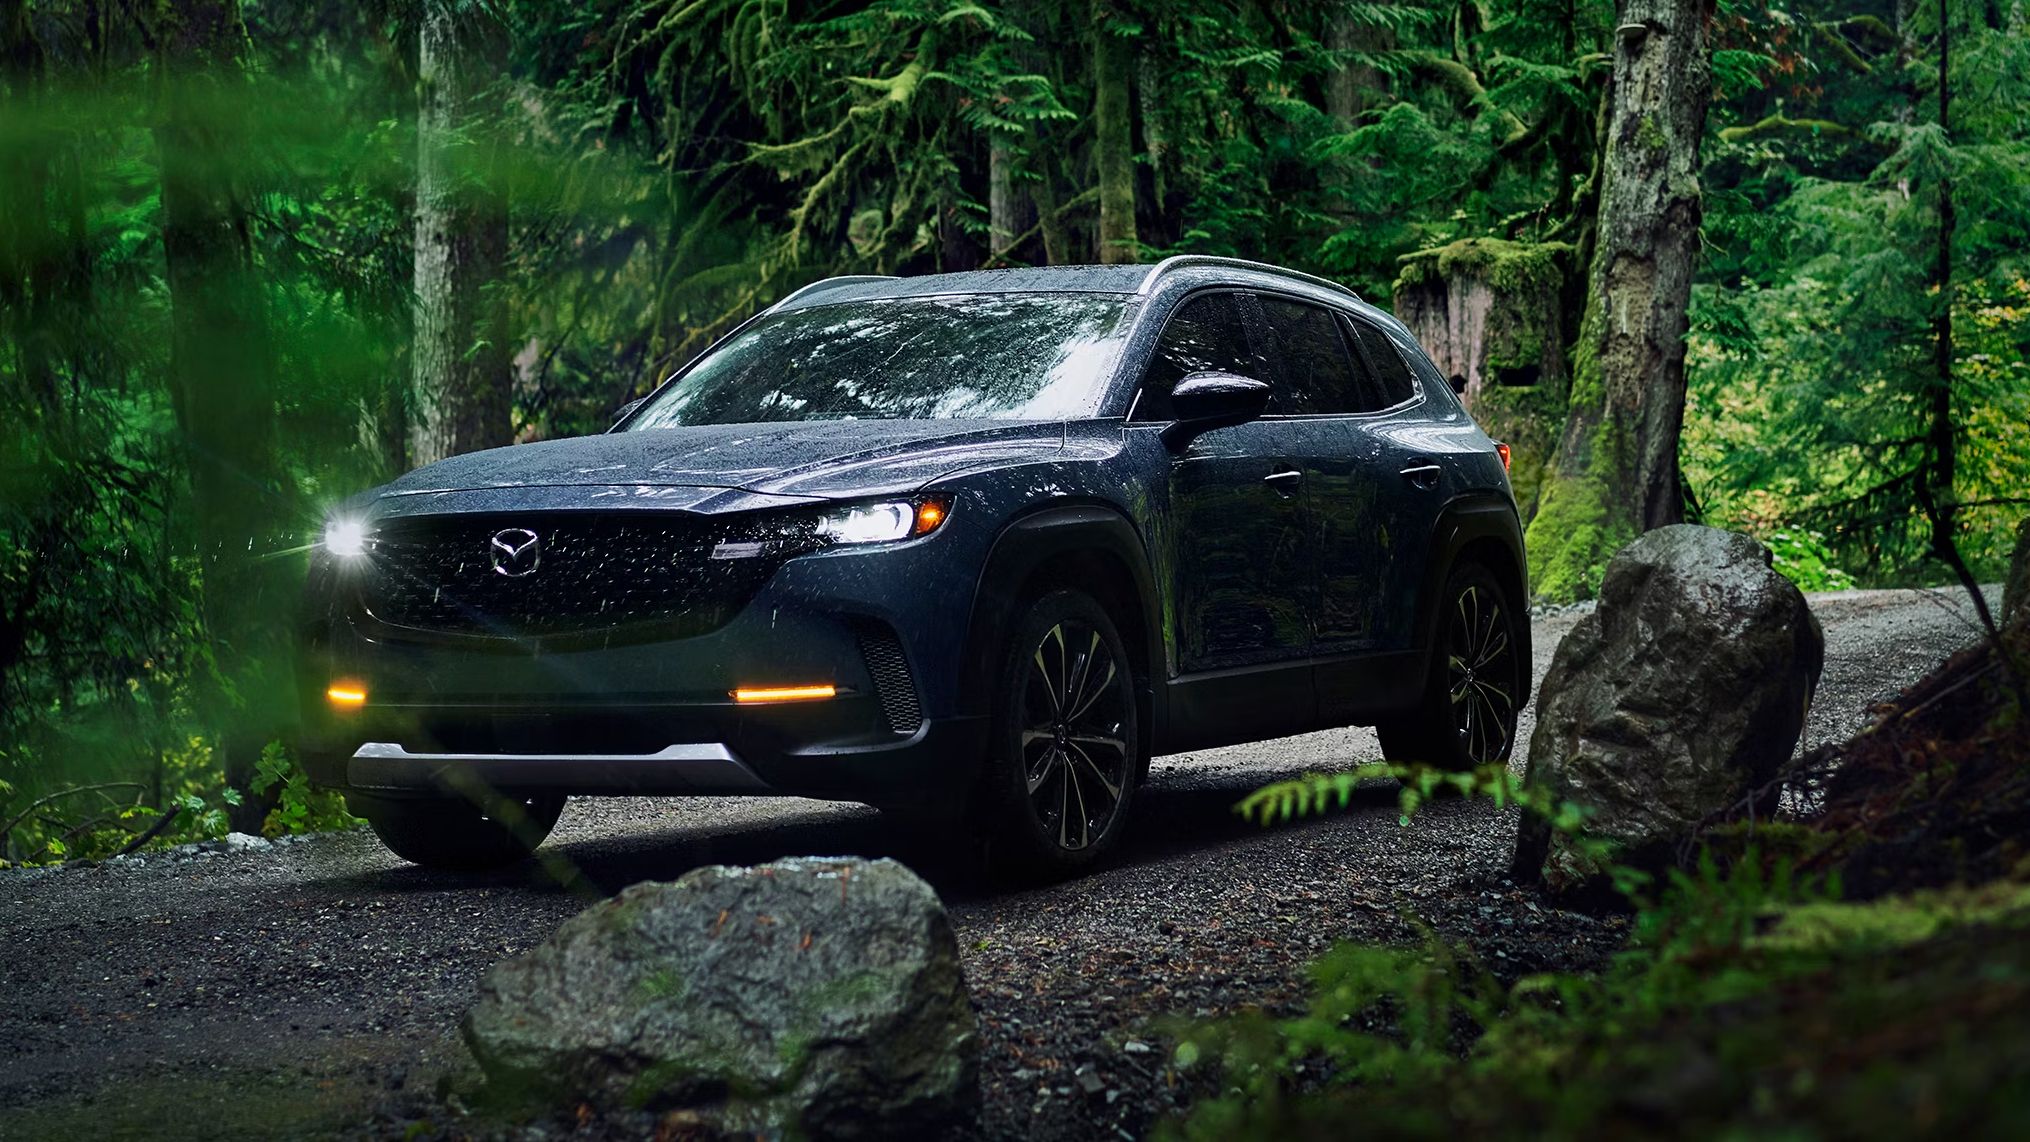 2023 Mazda CX-50 on an off-road trail in the forest